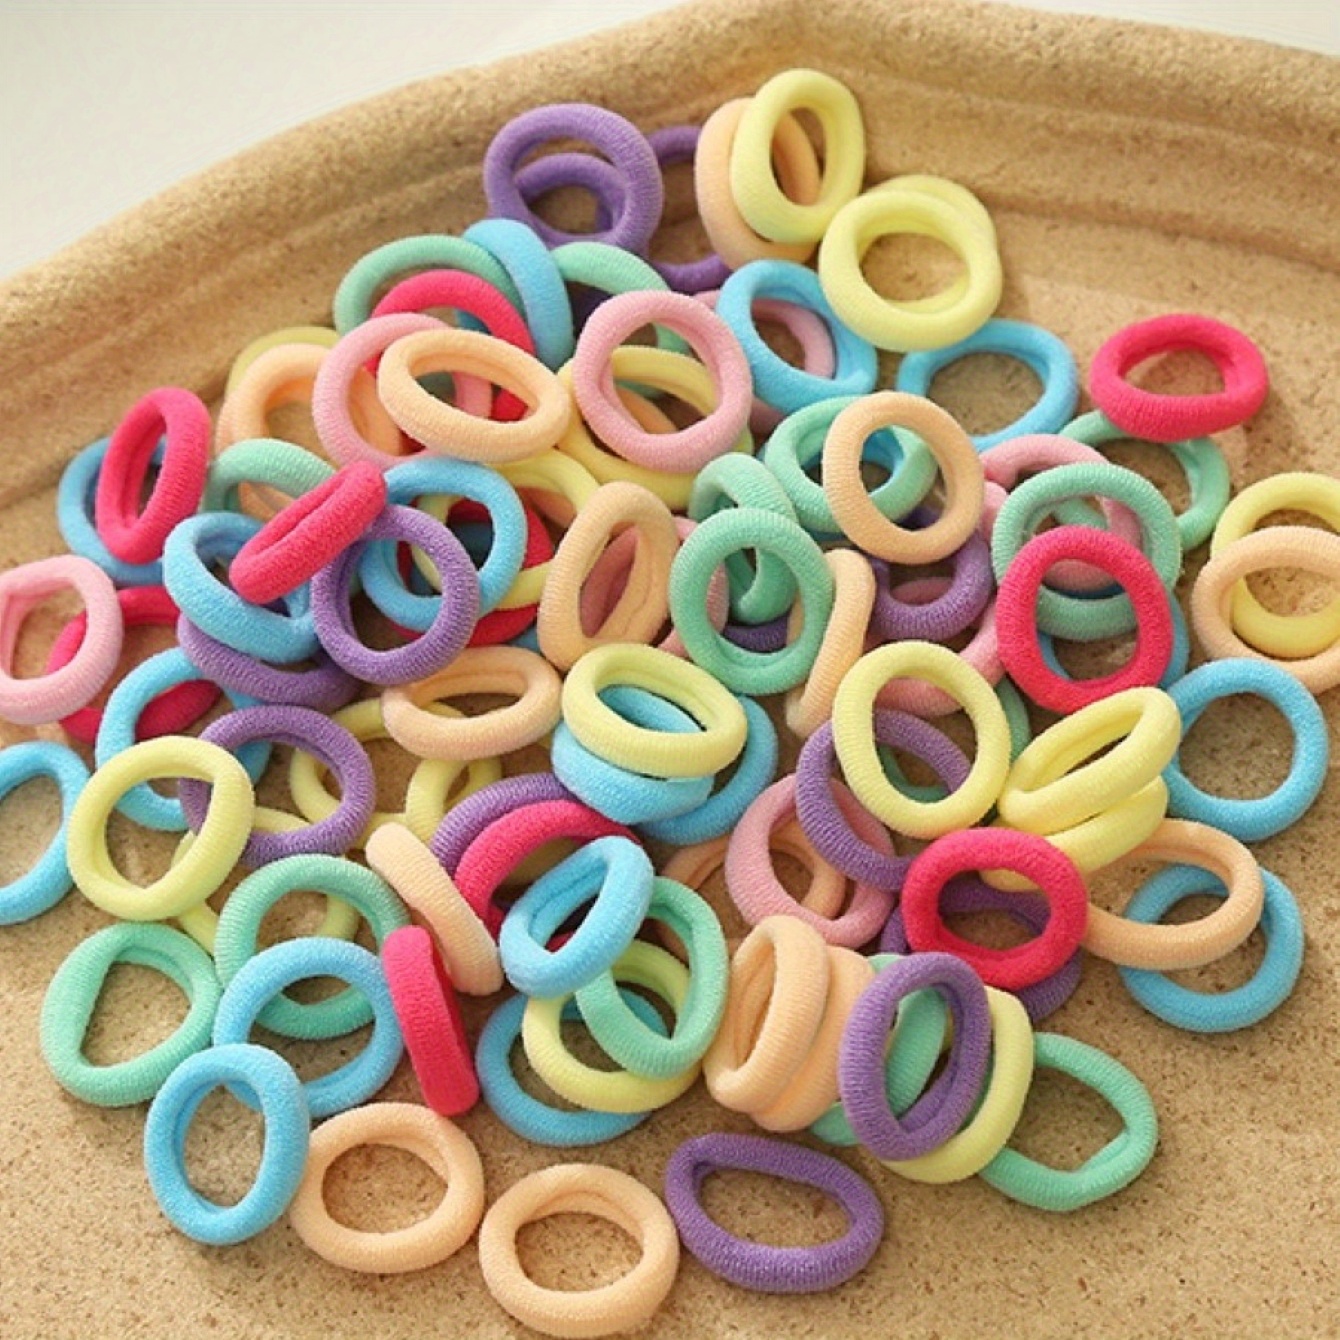 50pcs/container 4cm Diameter Nylon Seamless Solid Color Hair Ties